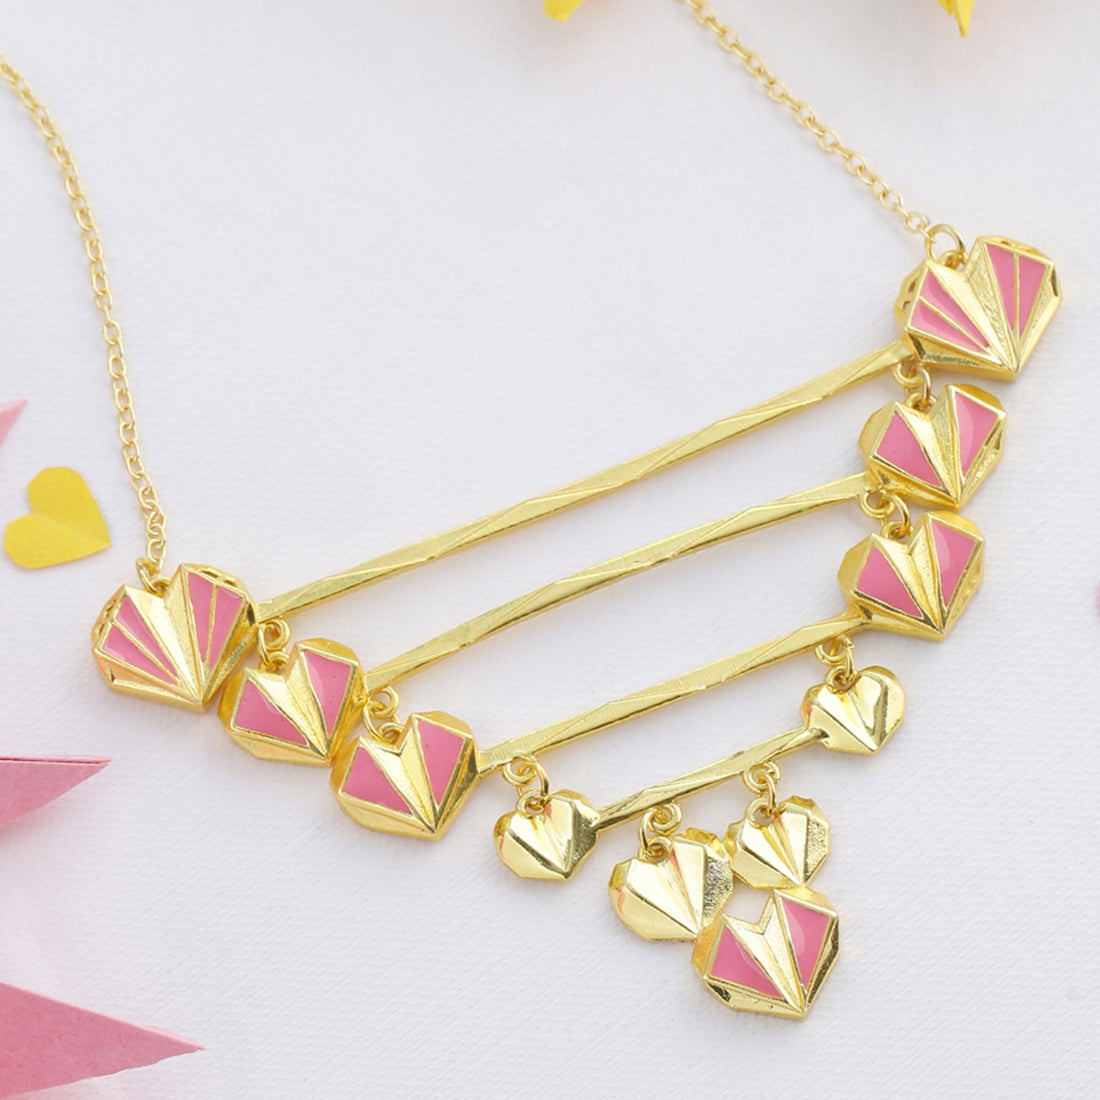 Mi Amore Hearts and Bars Necklace